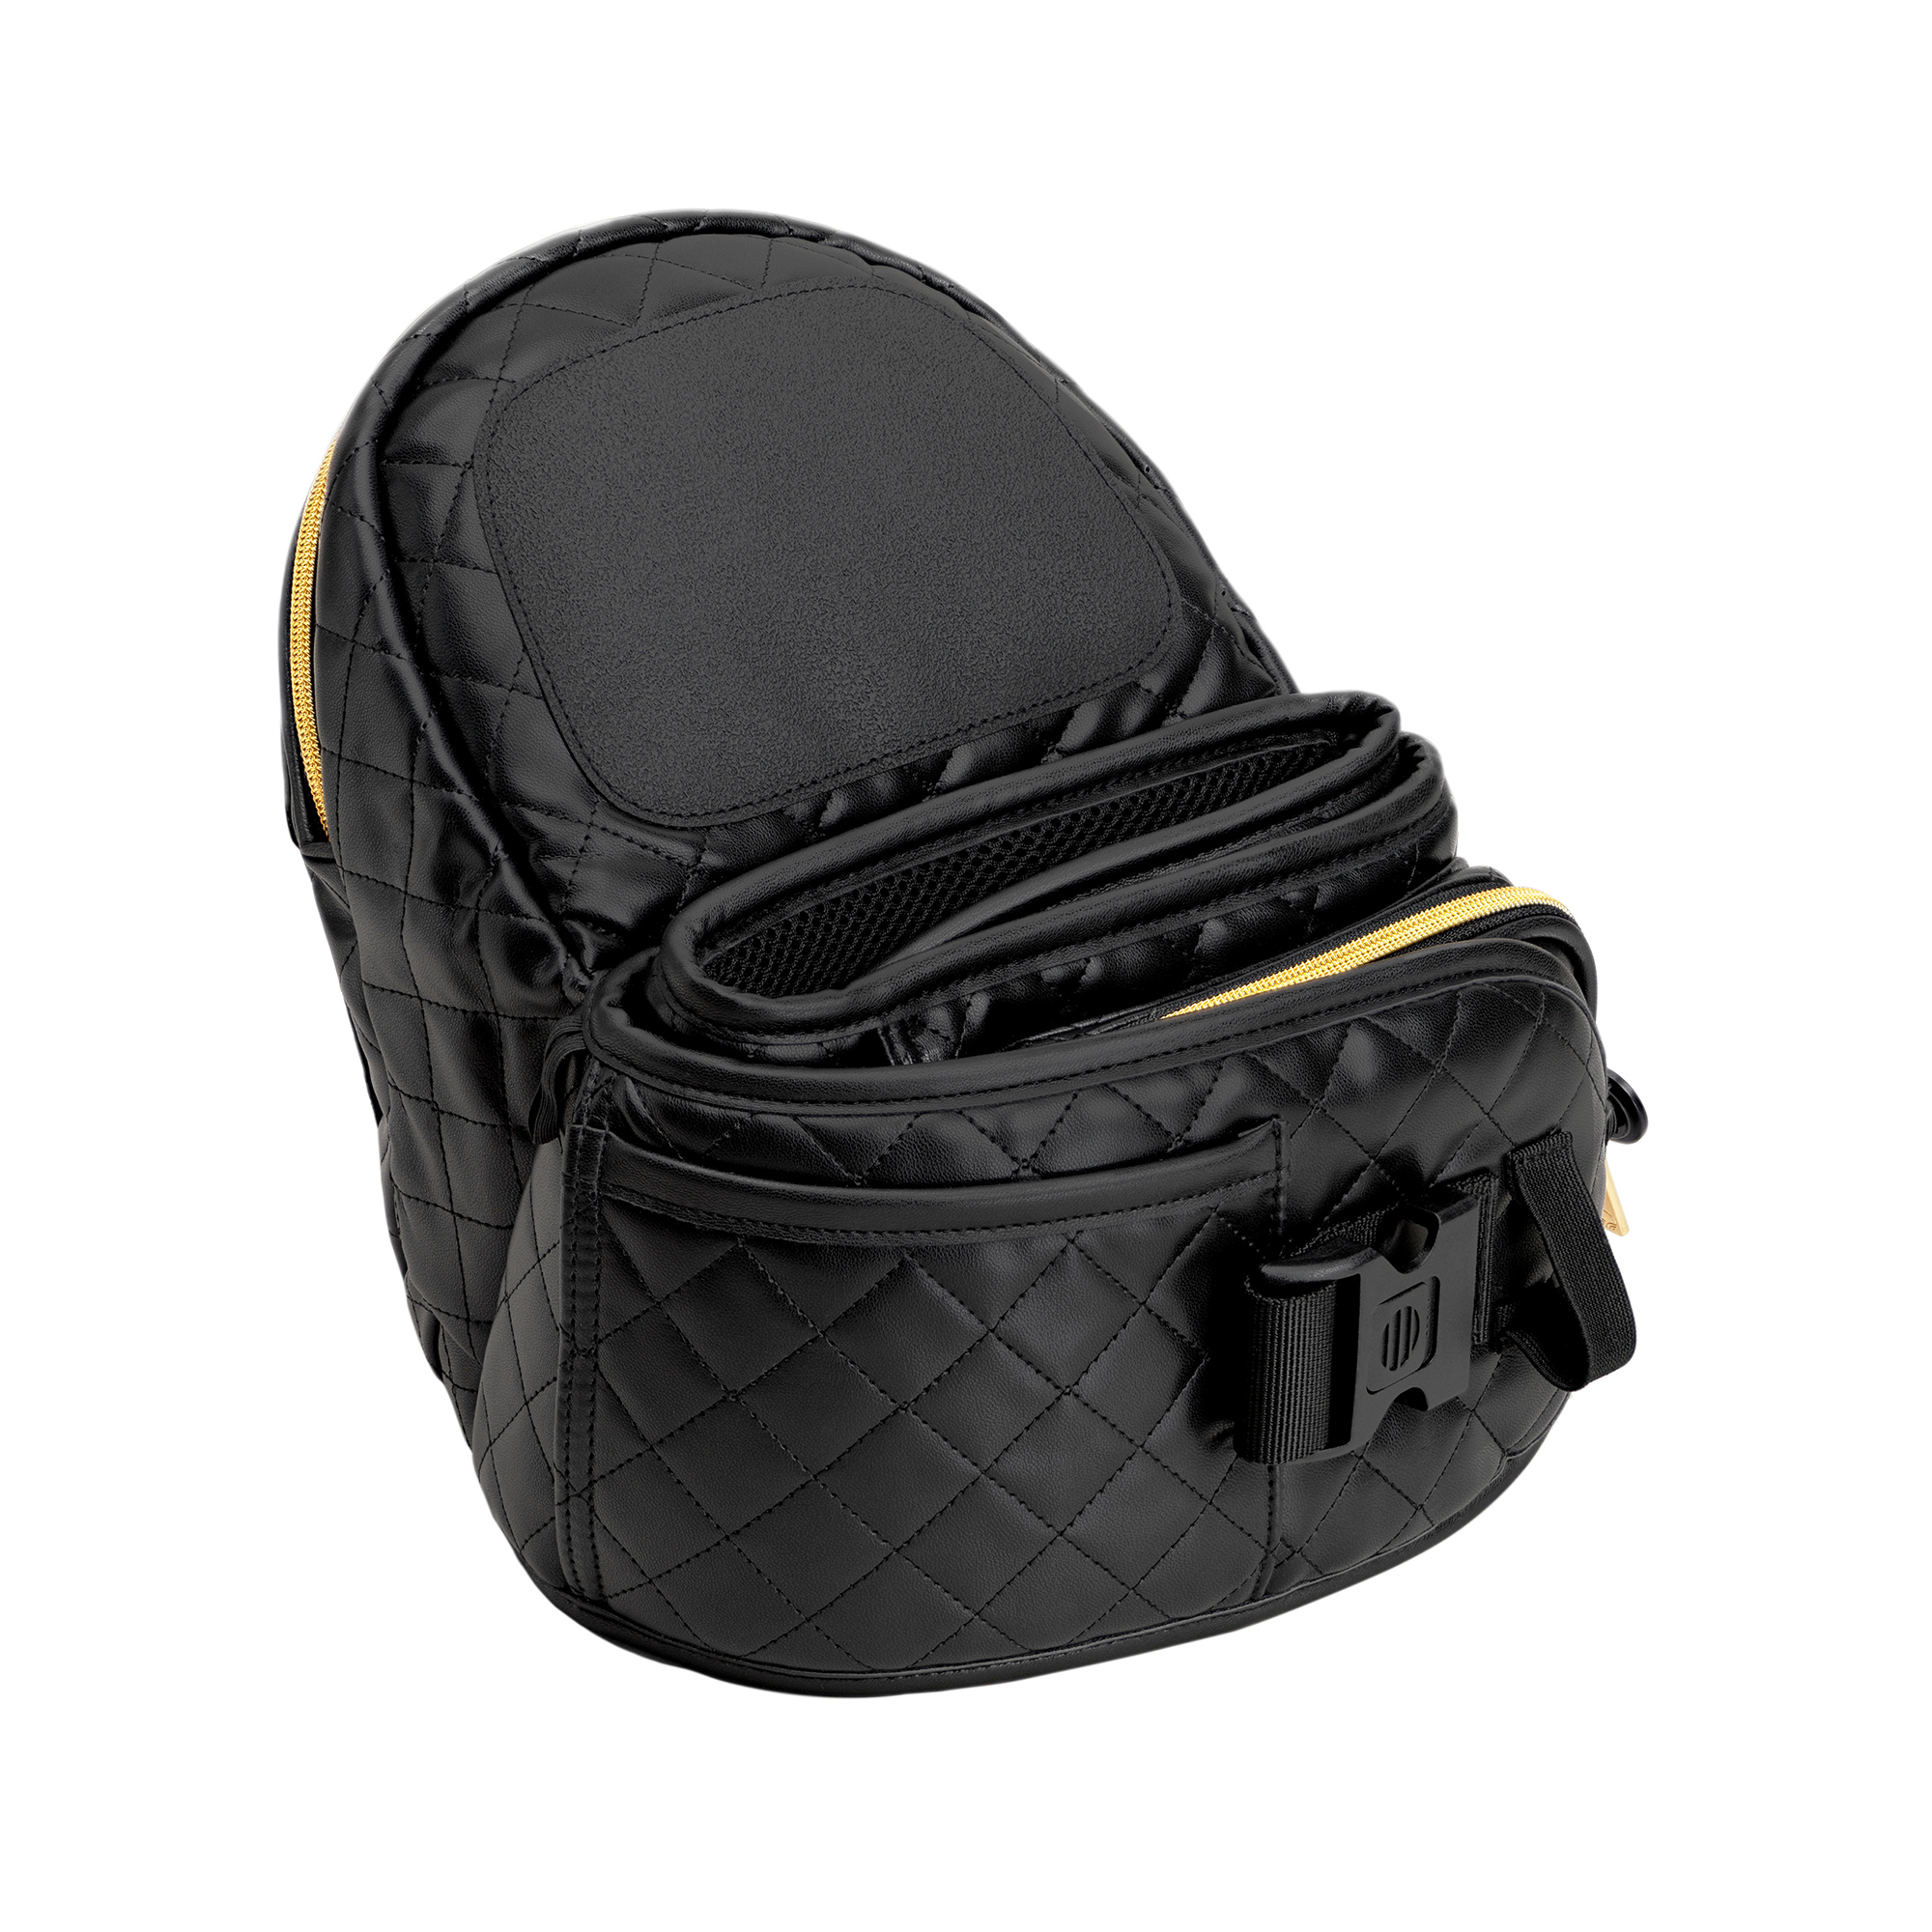 Tushbaby Vegan Leather Hip Seat Carrier